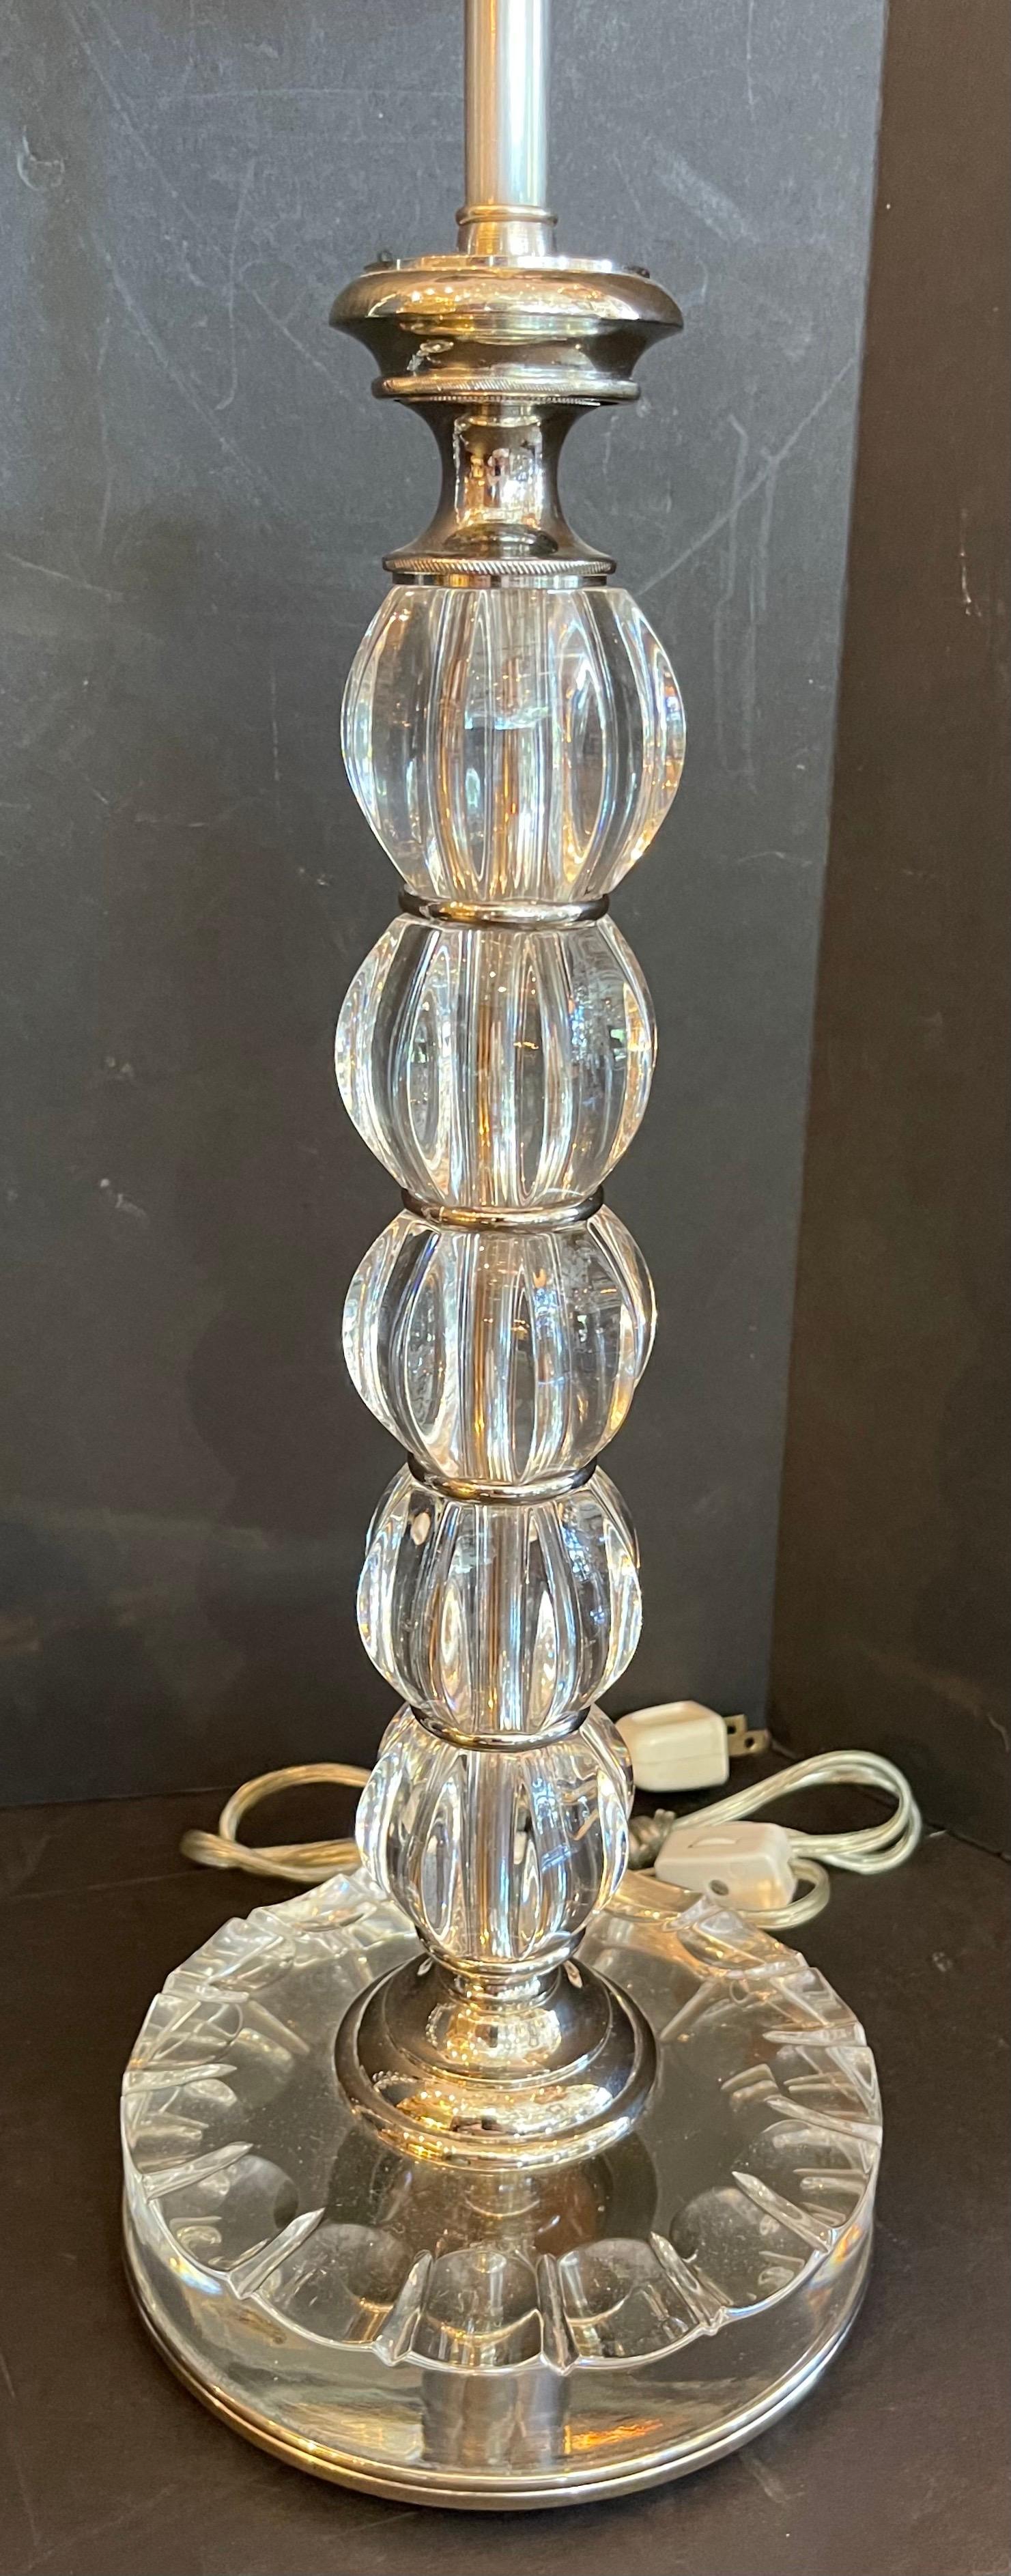 Wonderful Mid-Century Modern Crystal Polished Nickel Chrome Pair Baccarat Lamps In Good Condition For Sale In Roslyn, NY